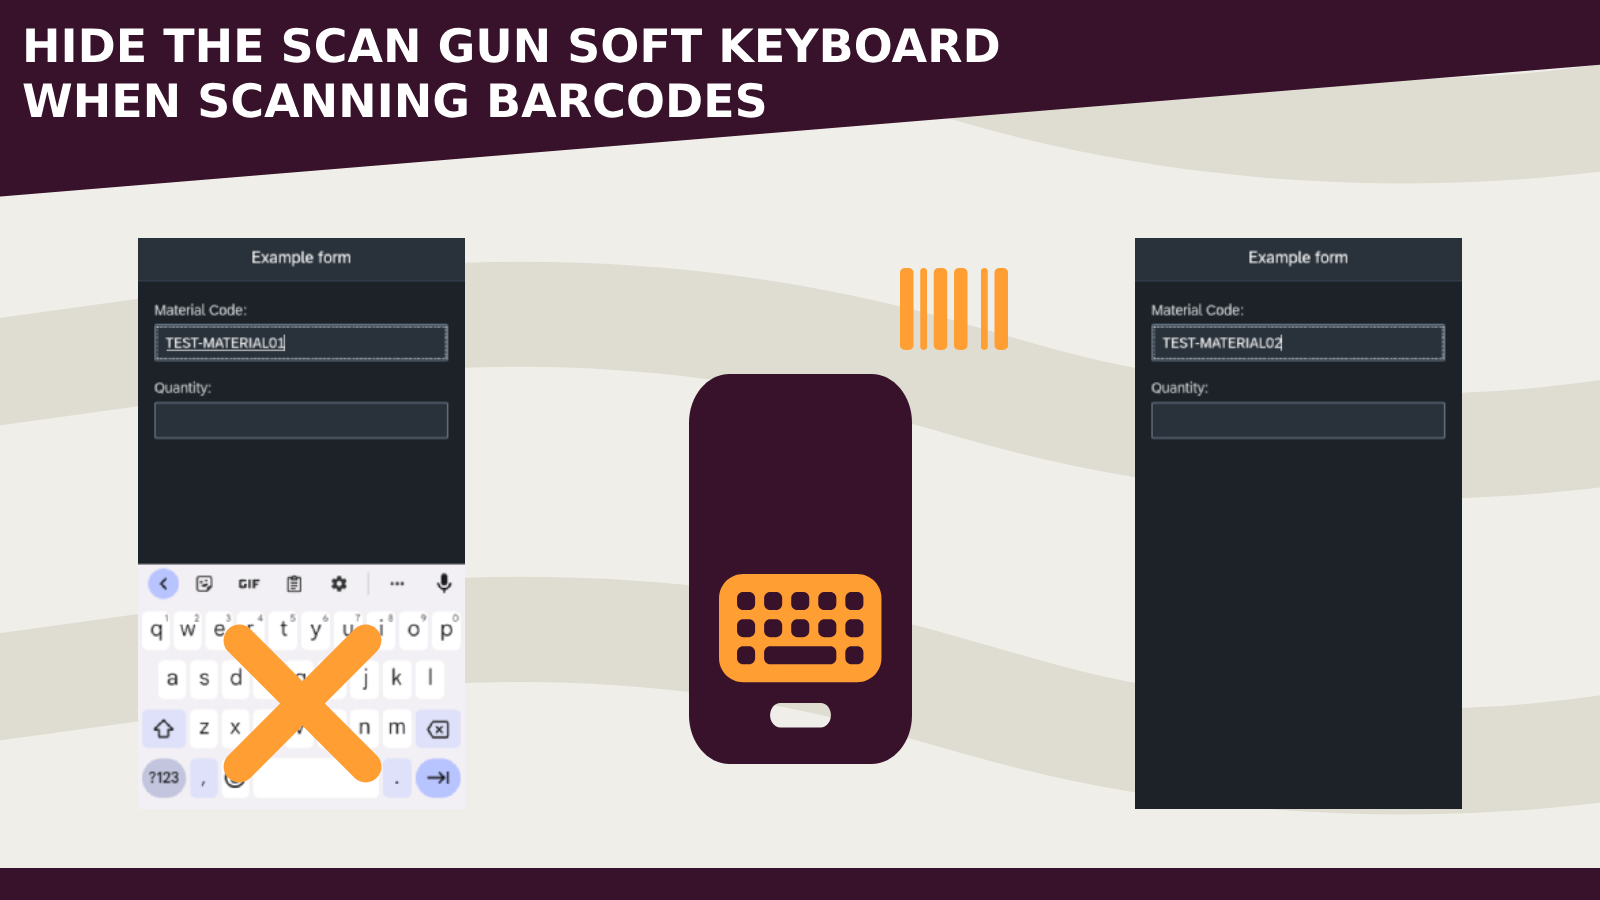 How to hide the scan gun soft keyboard when scanning barcodes